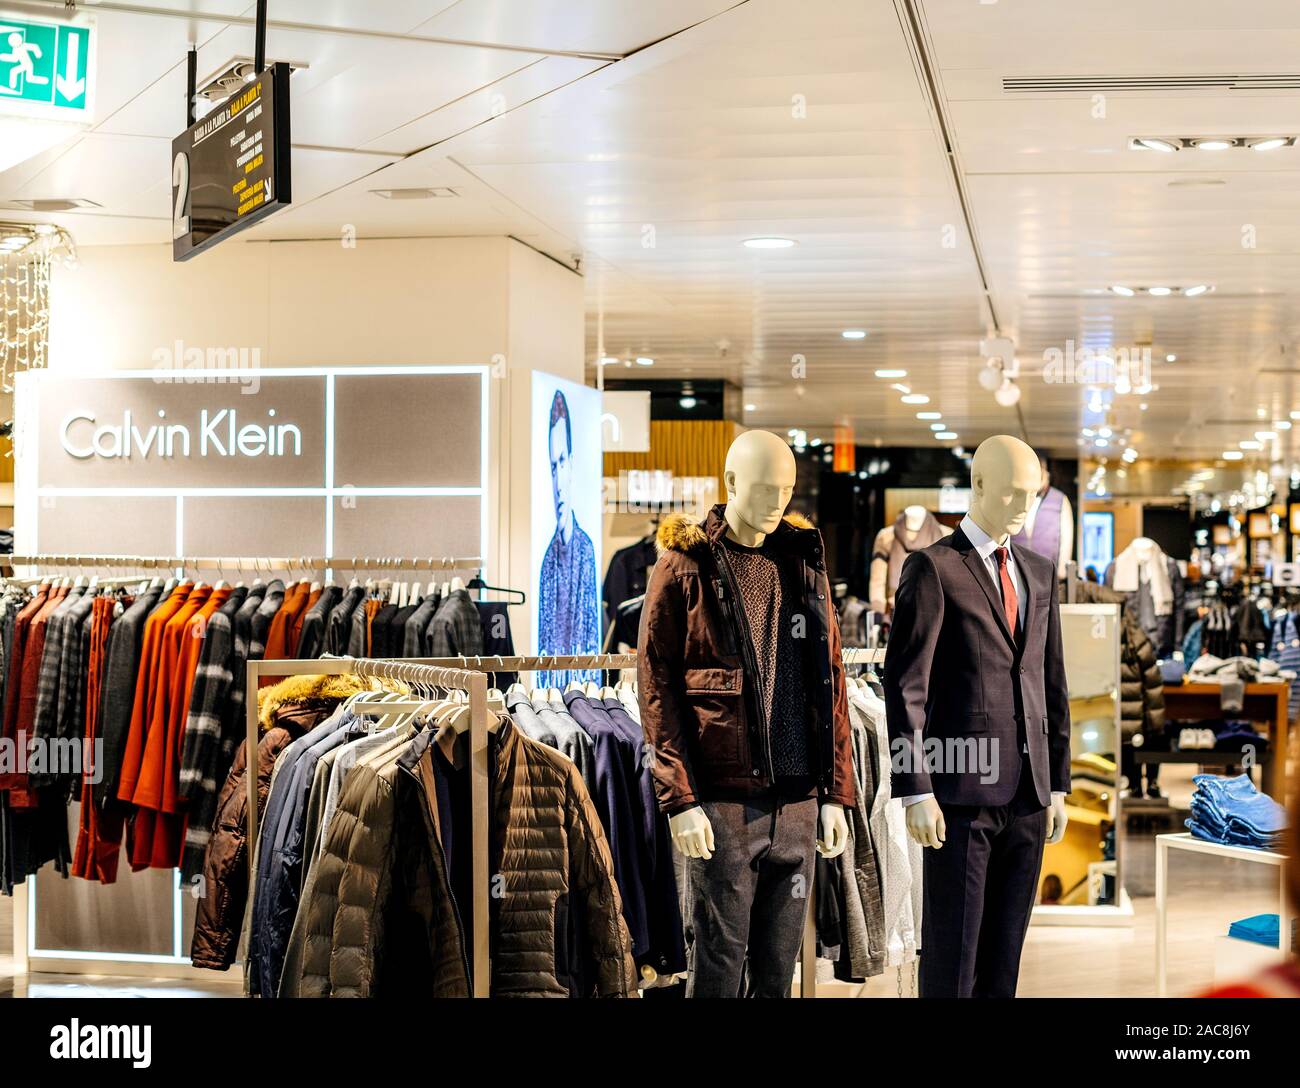 Knop Accumulatie prachtig Barcelona, Spain - Nov 17, 2017: Front view of Two mannequins male  silhouettes wearing luxury silk jackets costumes in upscale fashion clothes  store Calvin Klein in El Corte Ingles Mall Stock Photo - Alamy